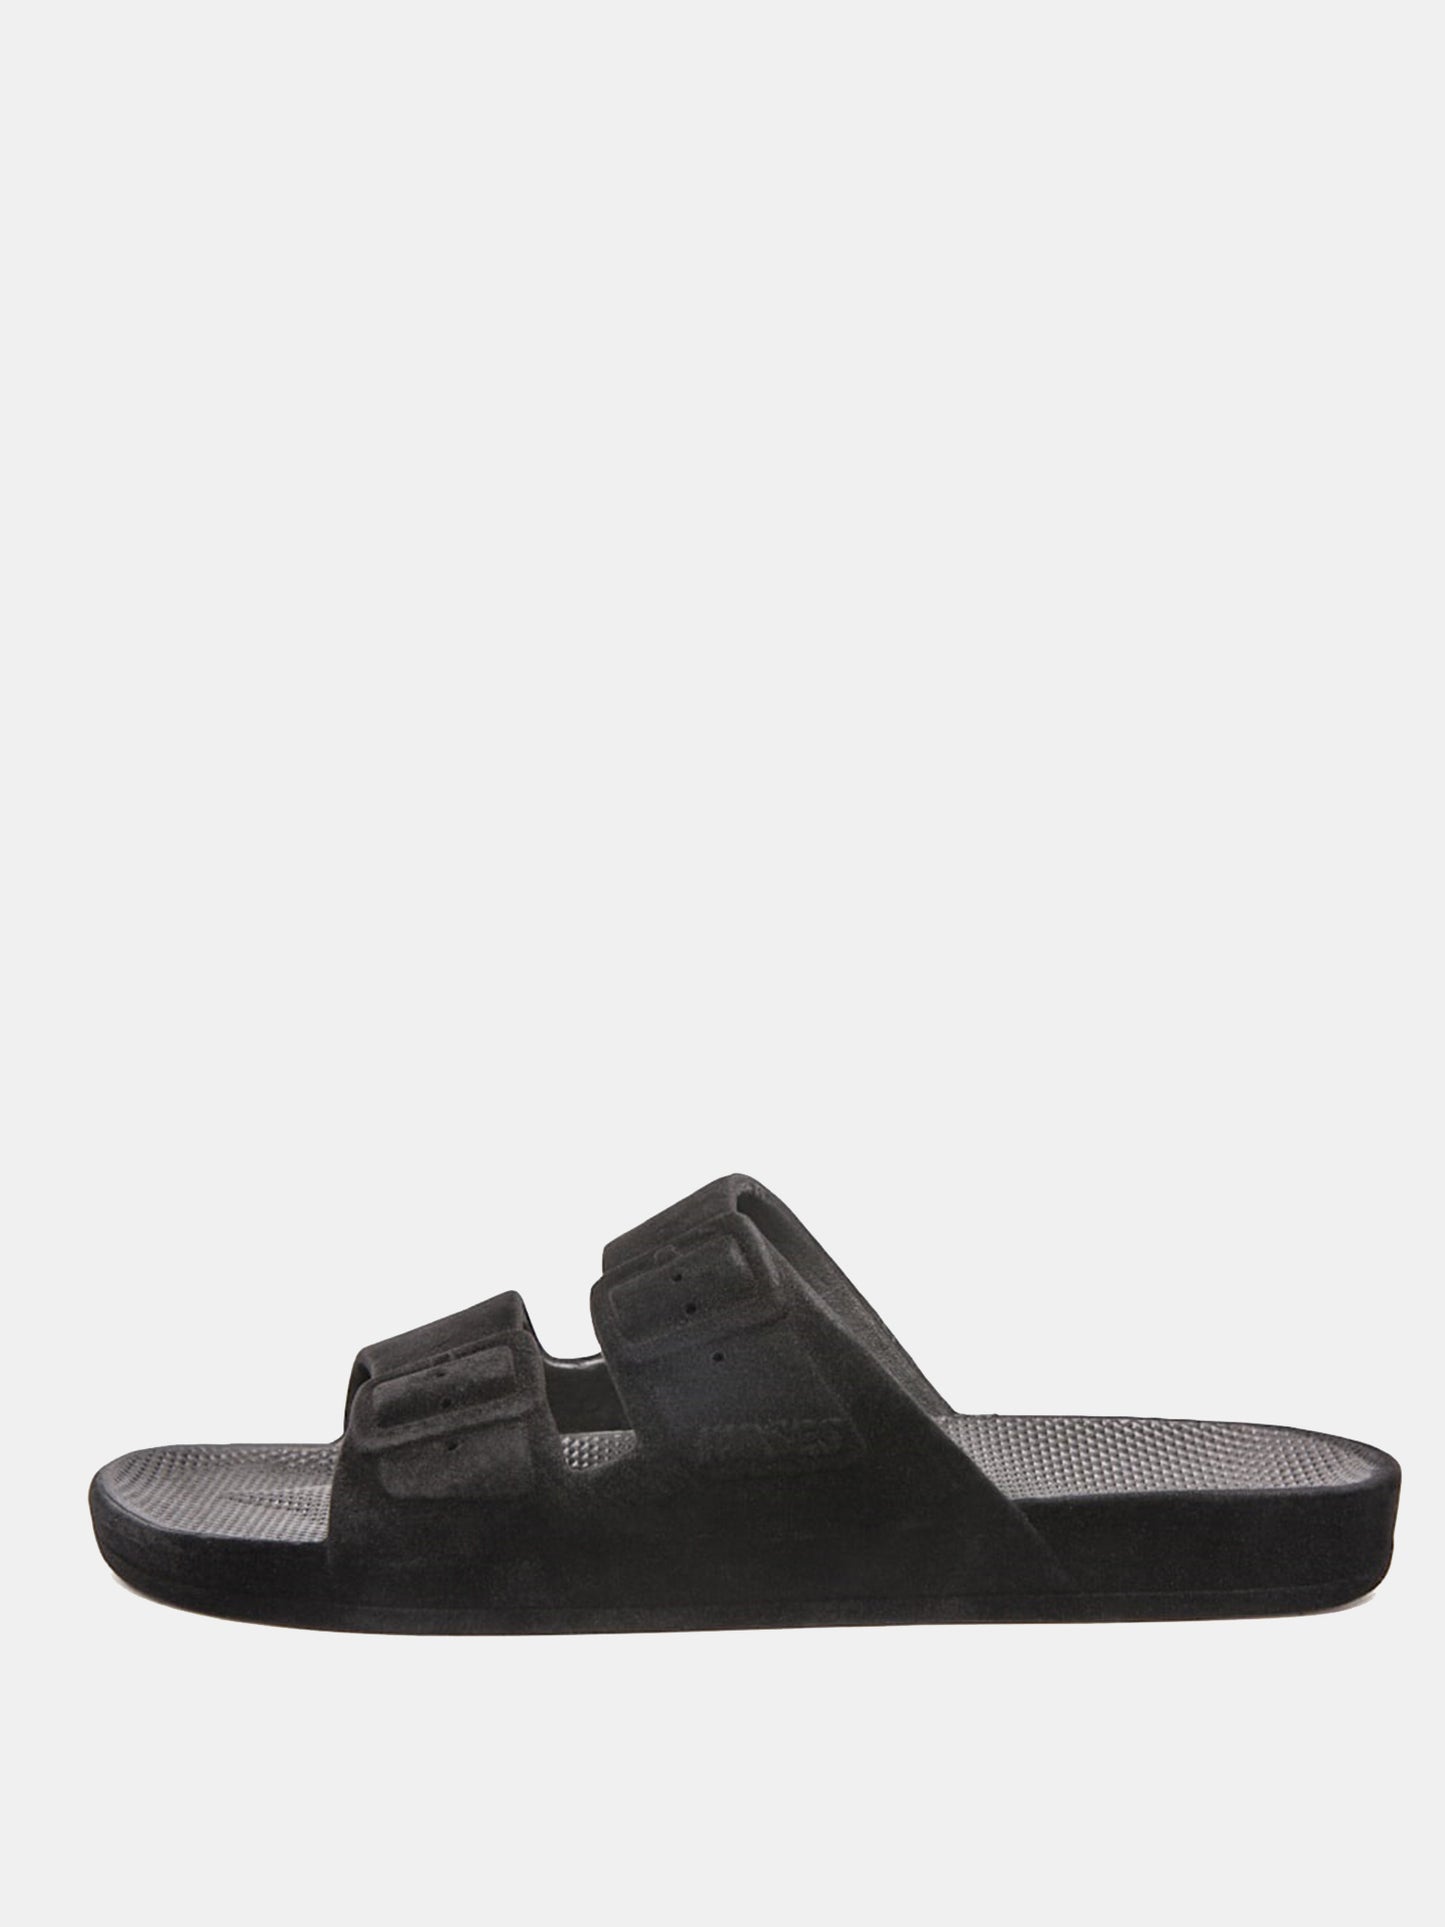 Freedom Moses Women's Moses Slide